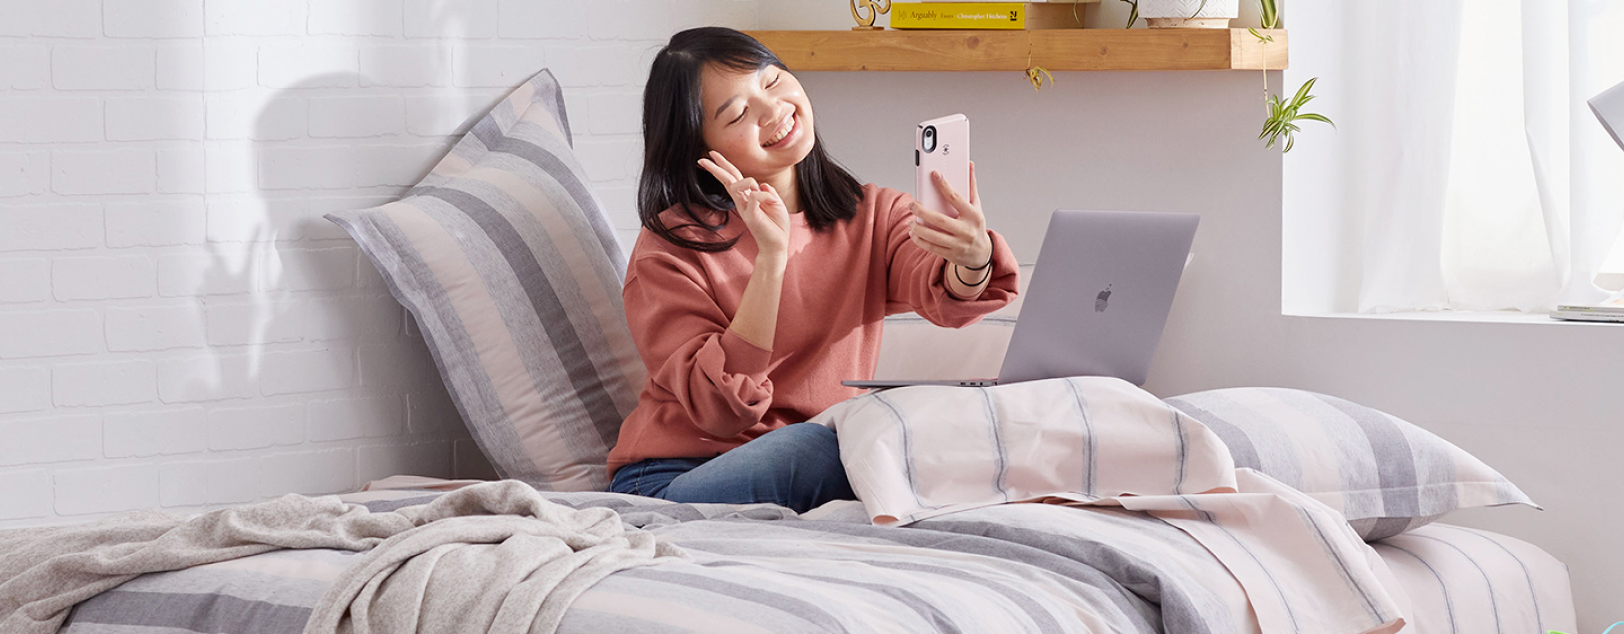 College student sitting on bed with phone and laptop.